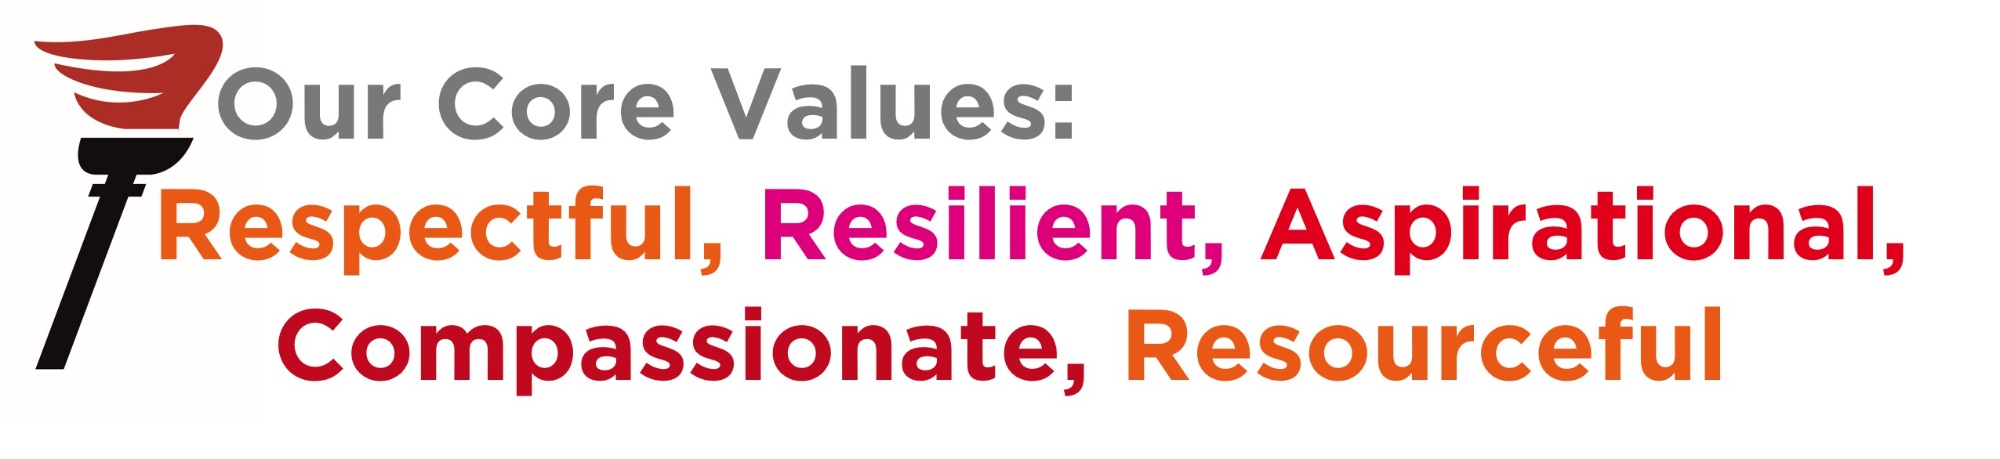 Our Core Values: Respectful, Resilient, Aspirational, Compassionate, Resourceful